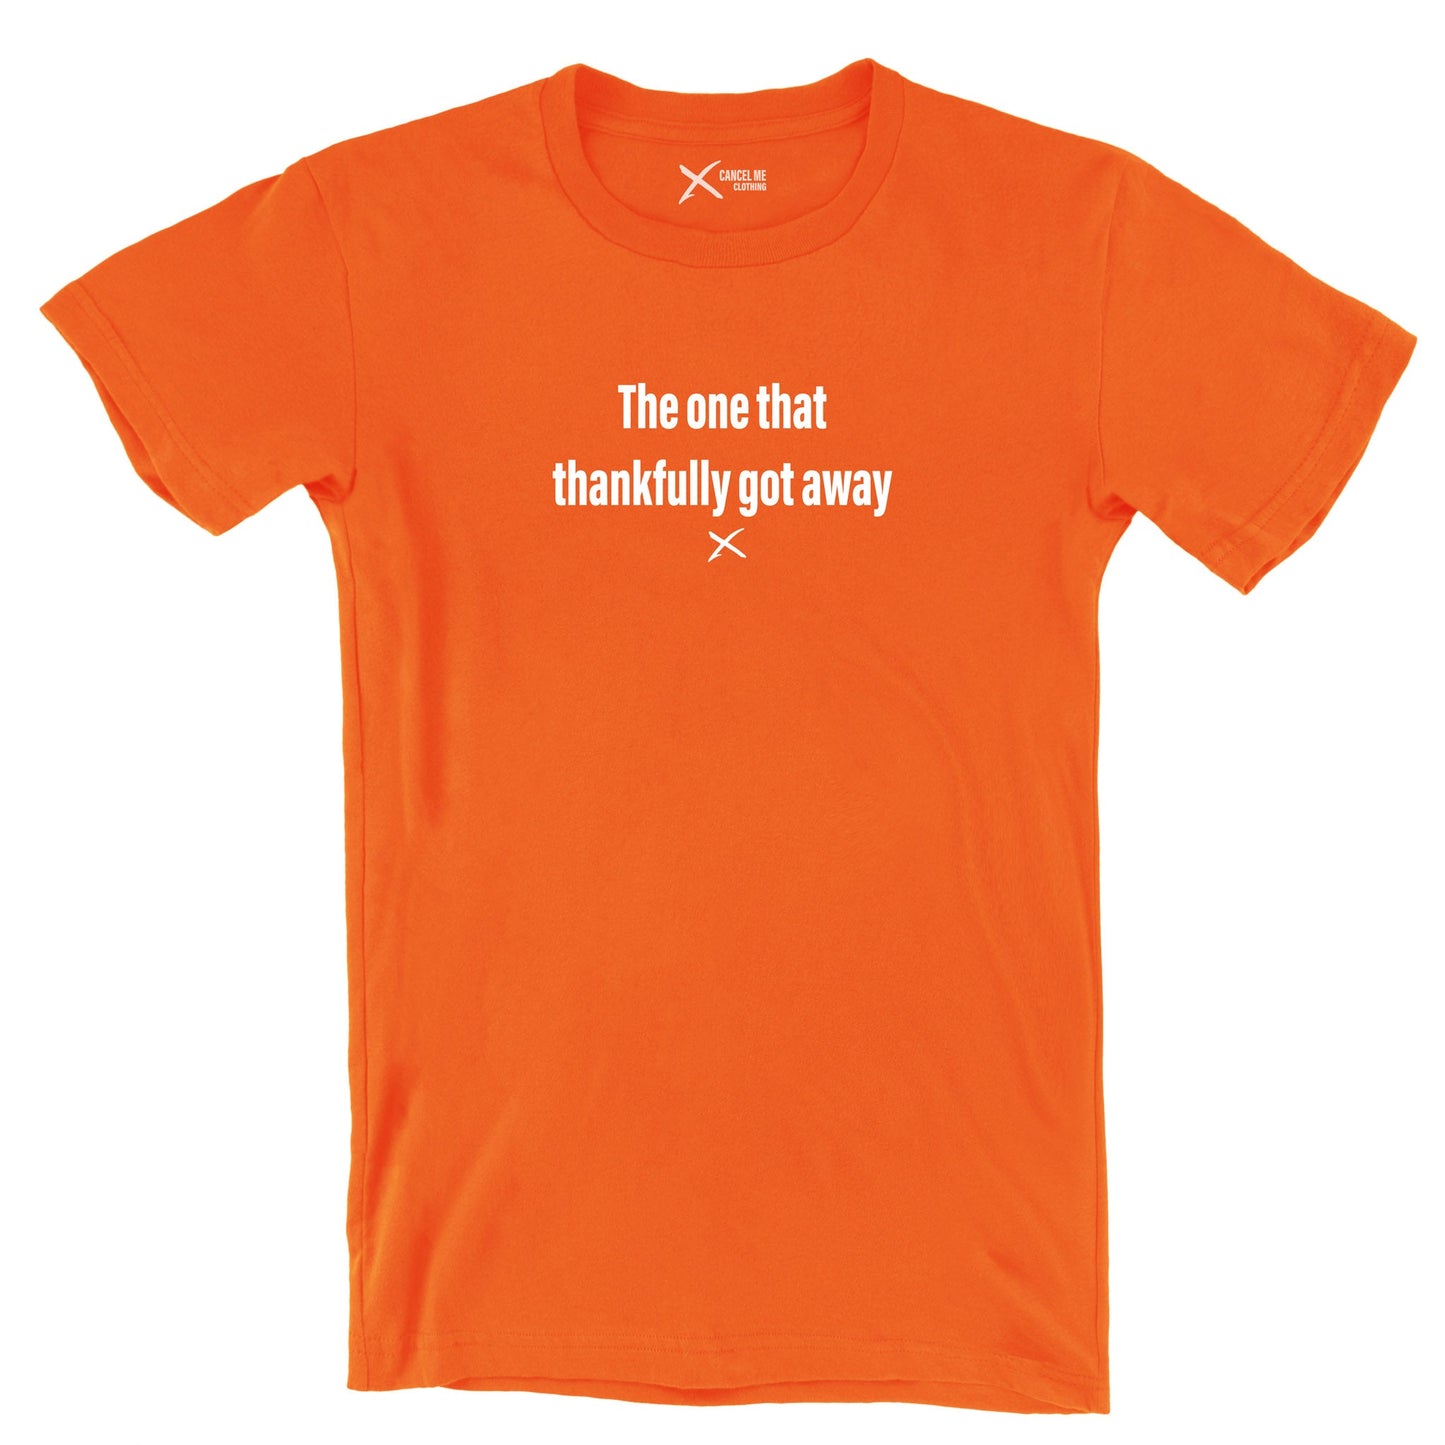 The one that thankfully got away - Shirt